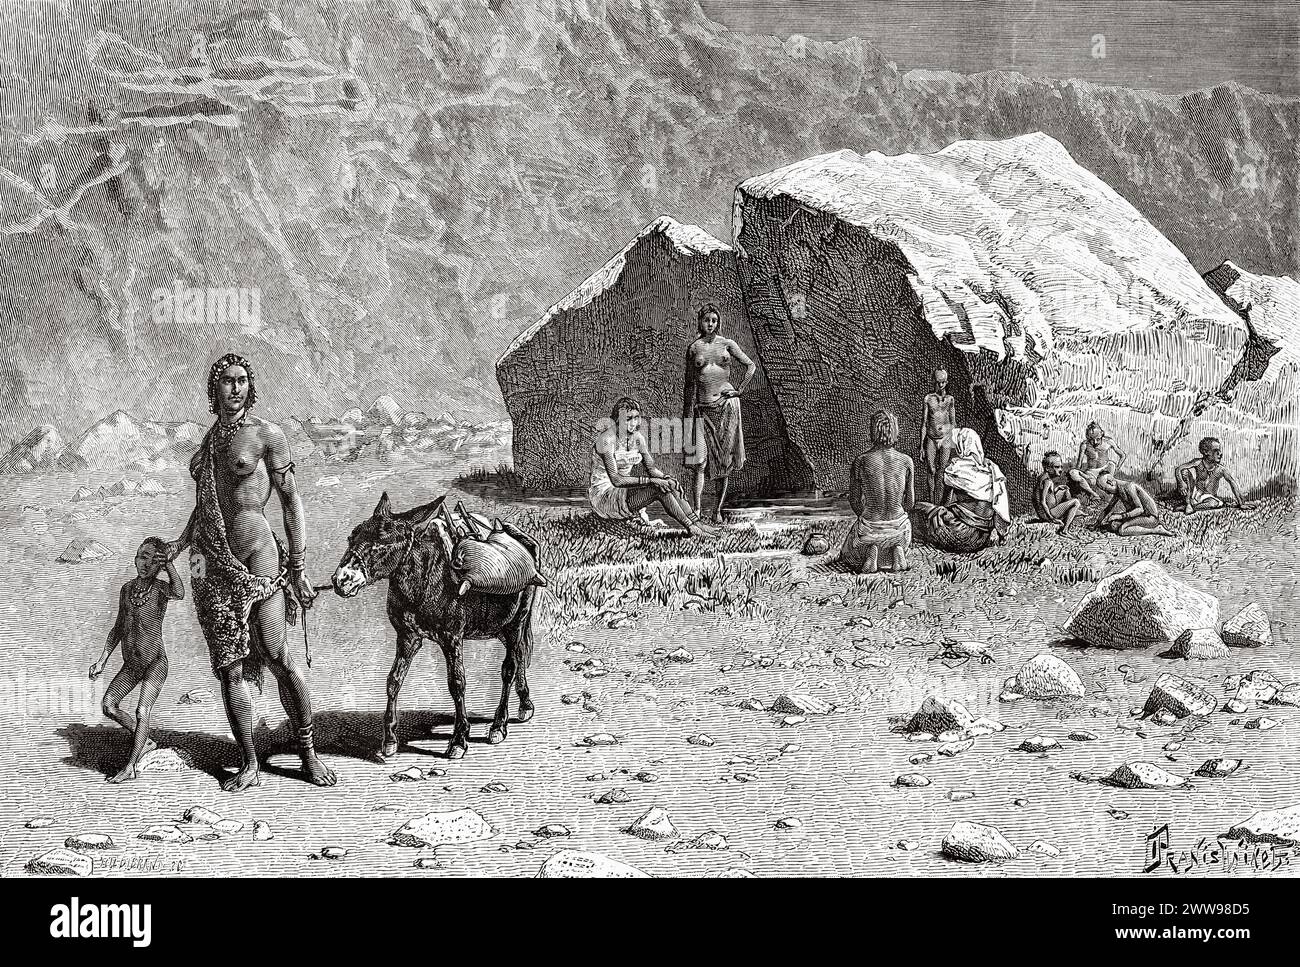 Toubou women and children collect water from the fountain, Tibesti Region, Chad, Africa. Drawing by Ivan Pranishnikoff (1841 - 1909) Two months in Tibesti, episodes from travels in Africa 1869-1873 by Dr. Gustav Hermann Nachtigal (1834 - 1885) Le Tour du Monde 1880 Stock Photo